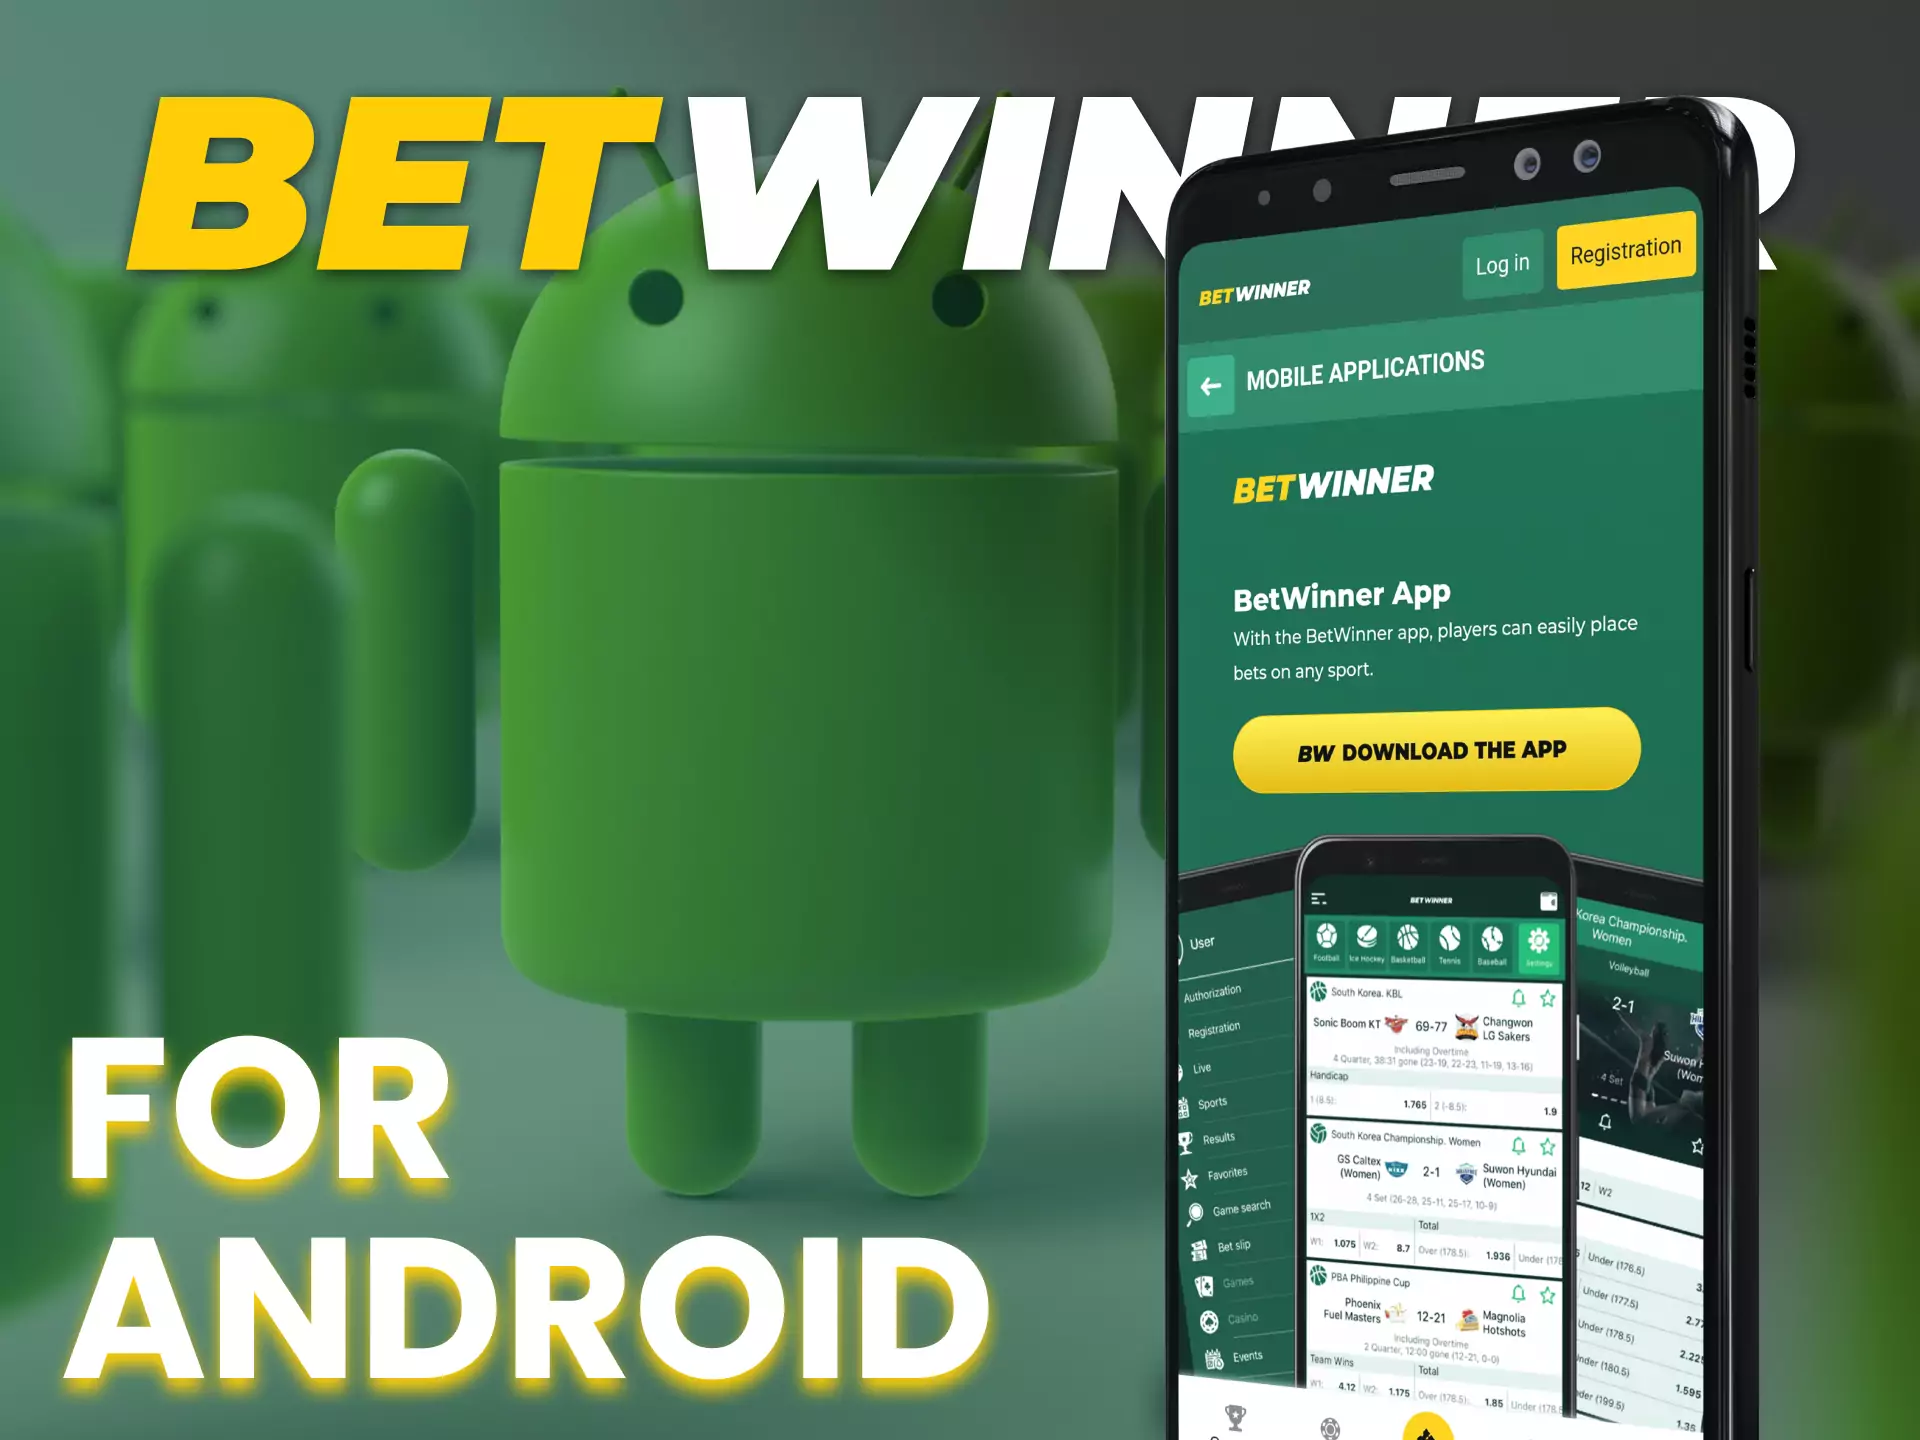 If You Want To Be A Winner, Change Your asian bookies, asian bookmakers, online betting malaysia, asian betting sites, best asian bookmakers, asian sports bookmakers, sports betting malaysia, online sports betting malaysia, singapore online sportsbook Philosophy Now!